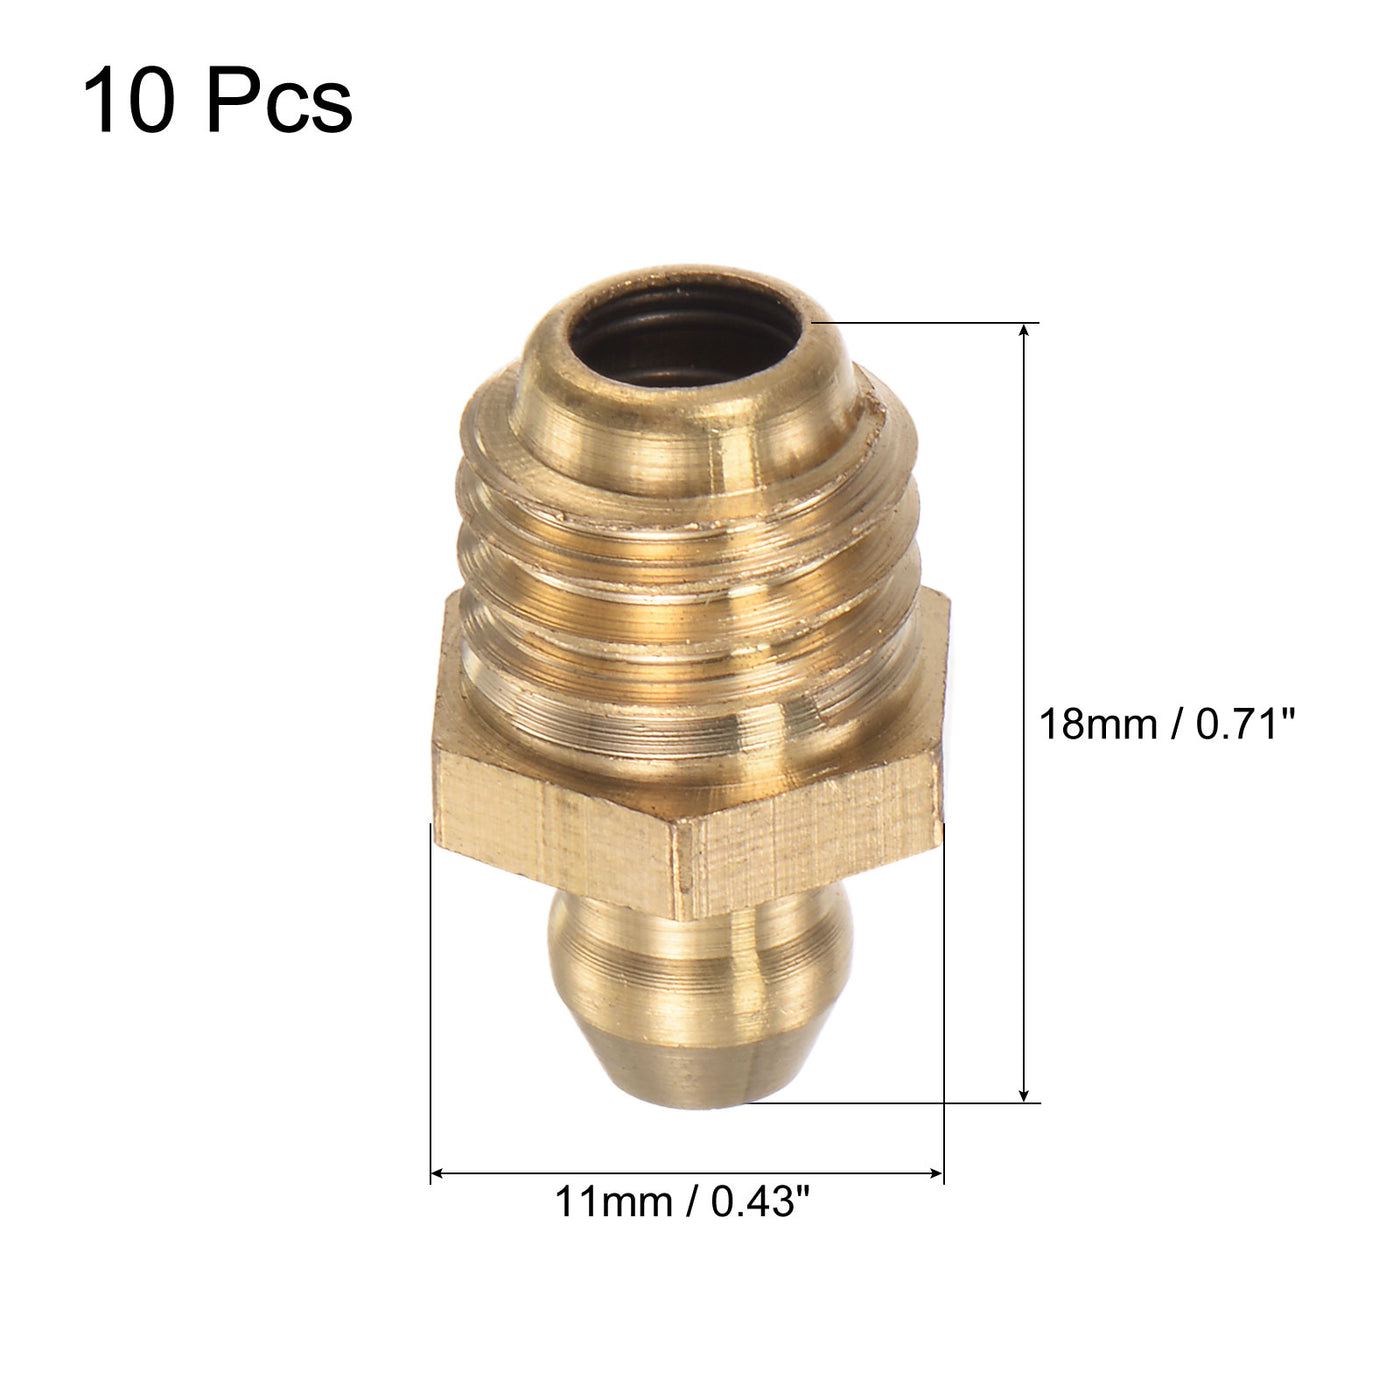 Uxcell Uxcell Brass Hydraulic Grease Fitting Assortment Accessories M12 x 1mm Thread, 10Pcs